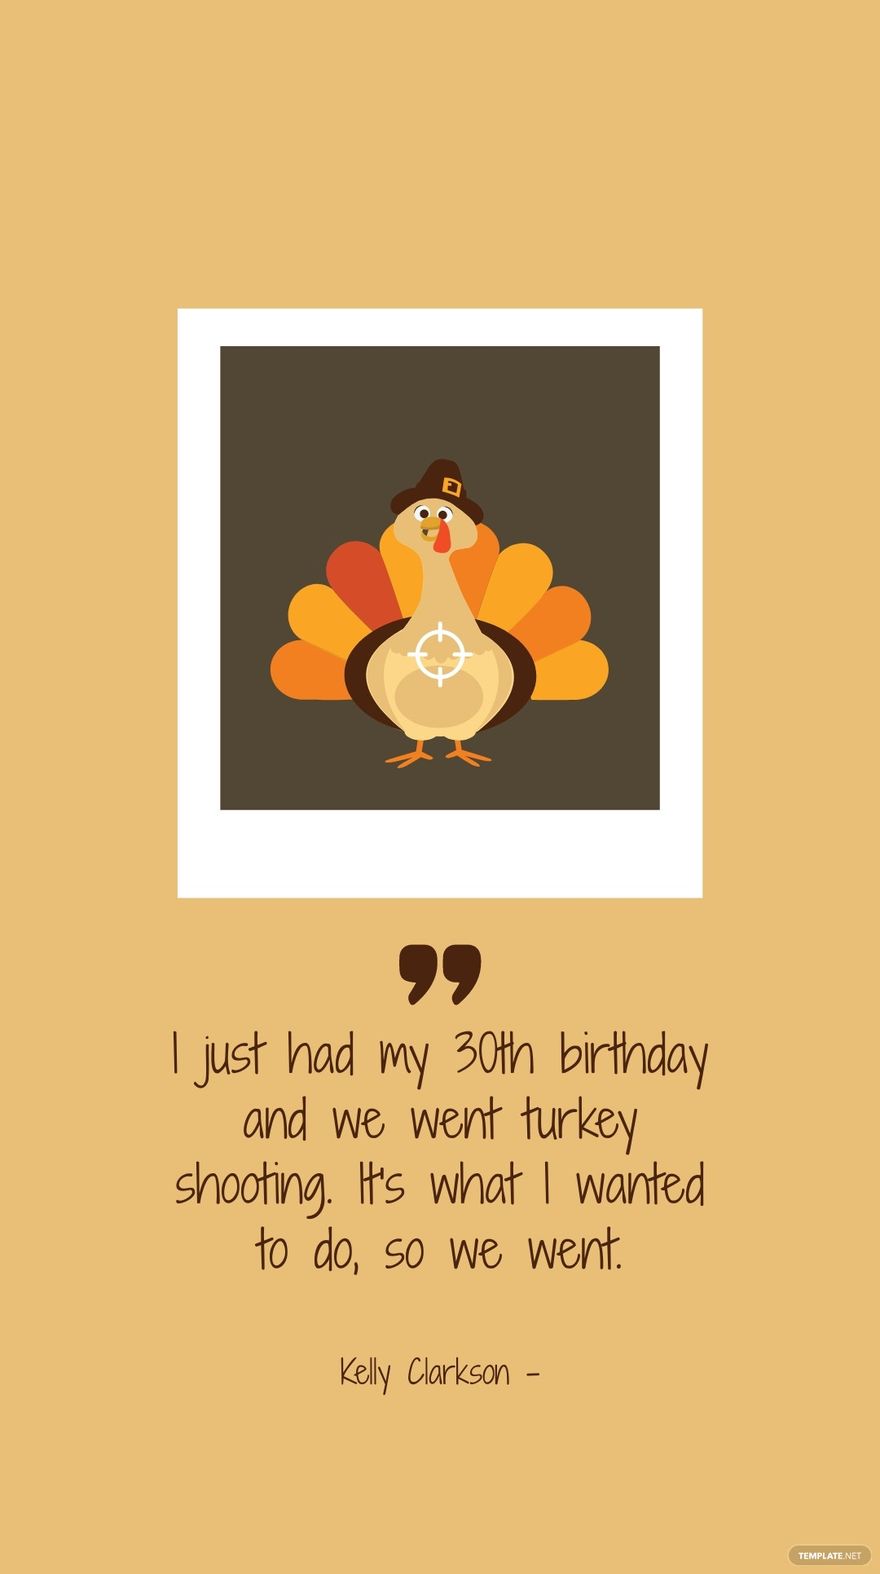 Kelly Clarkson - I just had my 30th birthday and we went turkey shooting. It's what I wanted to do, so we went. in JPG